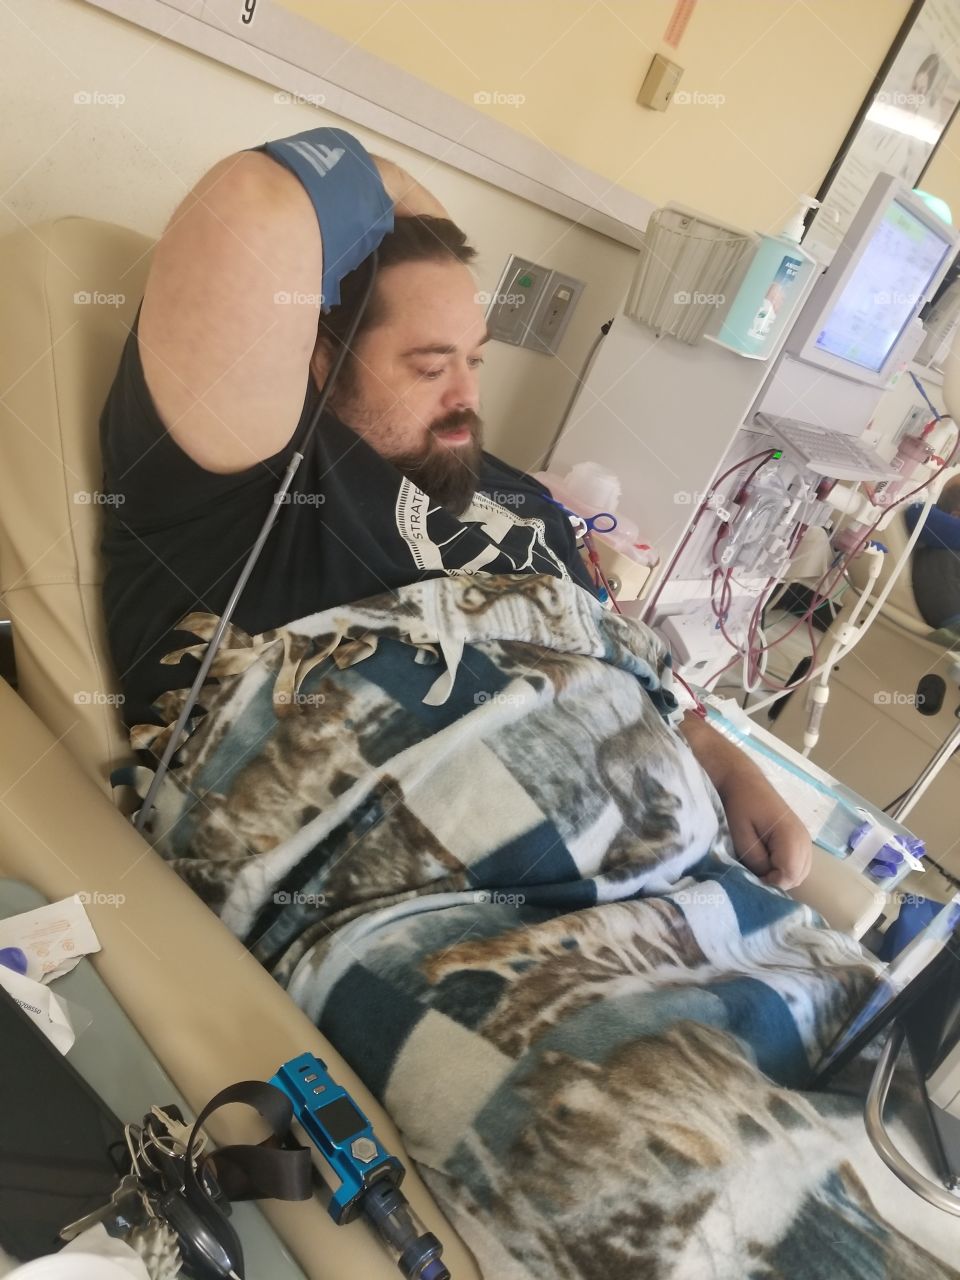 dialysis patient in the hospital